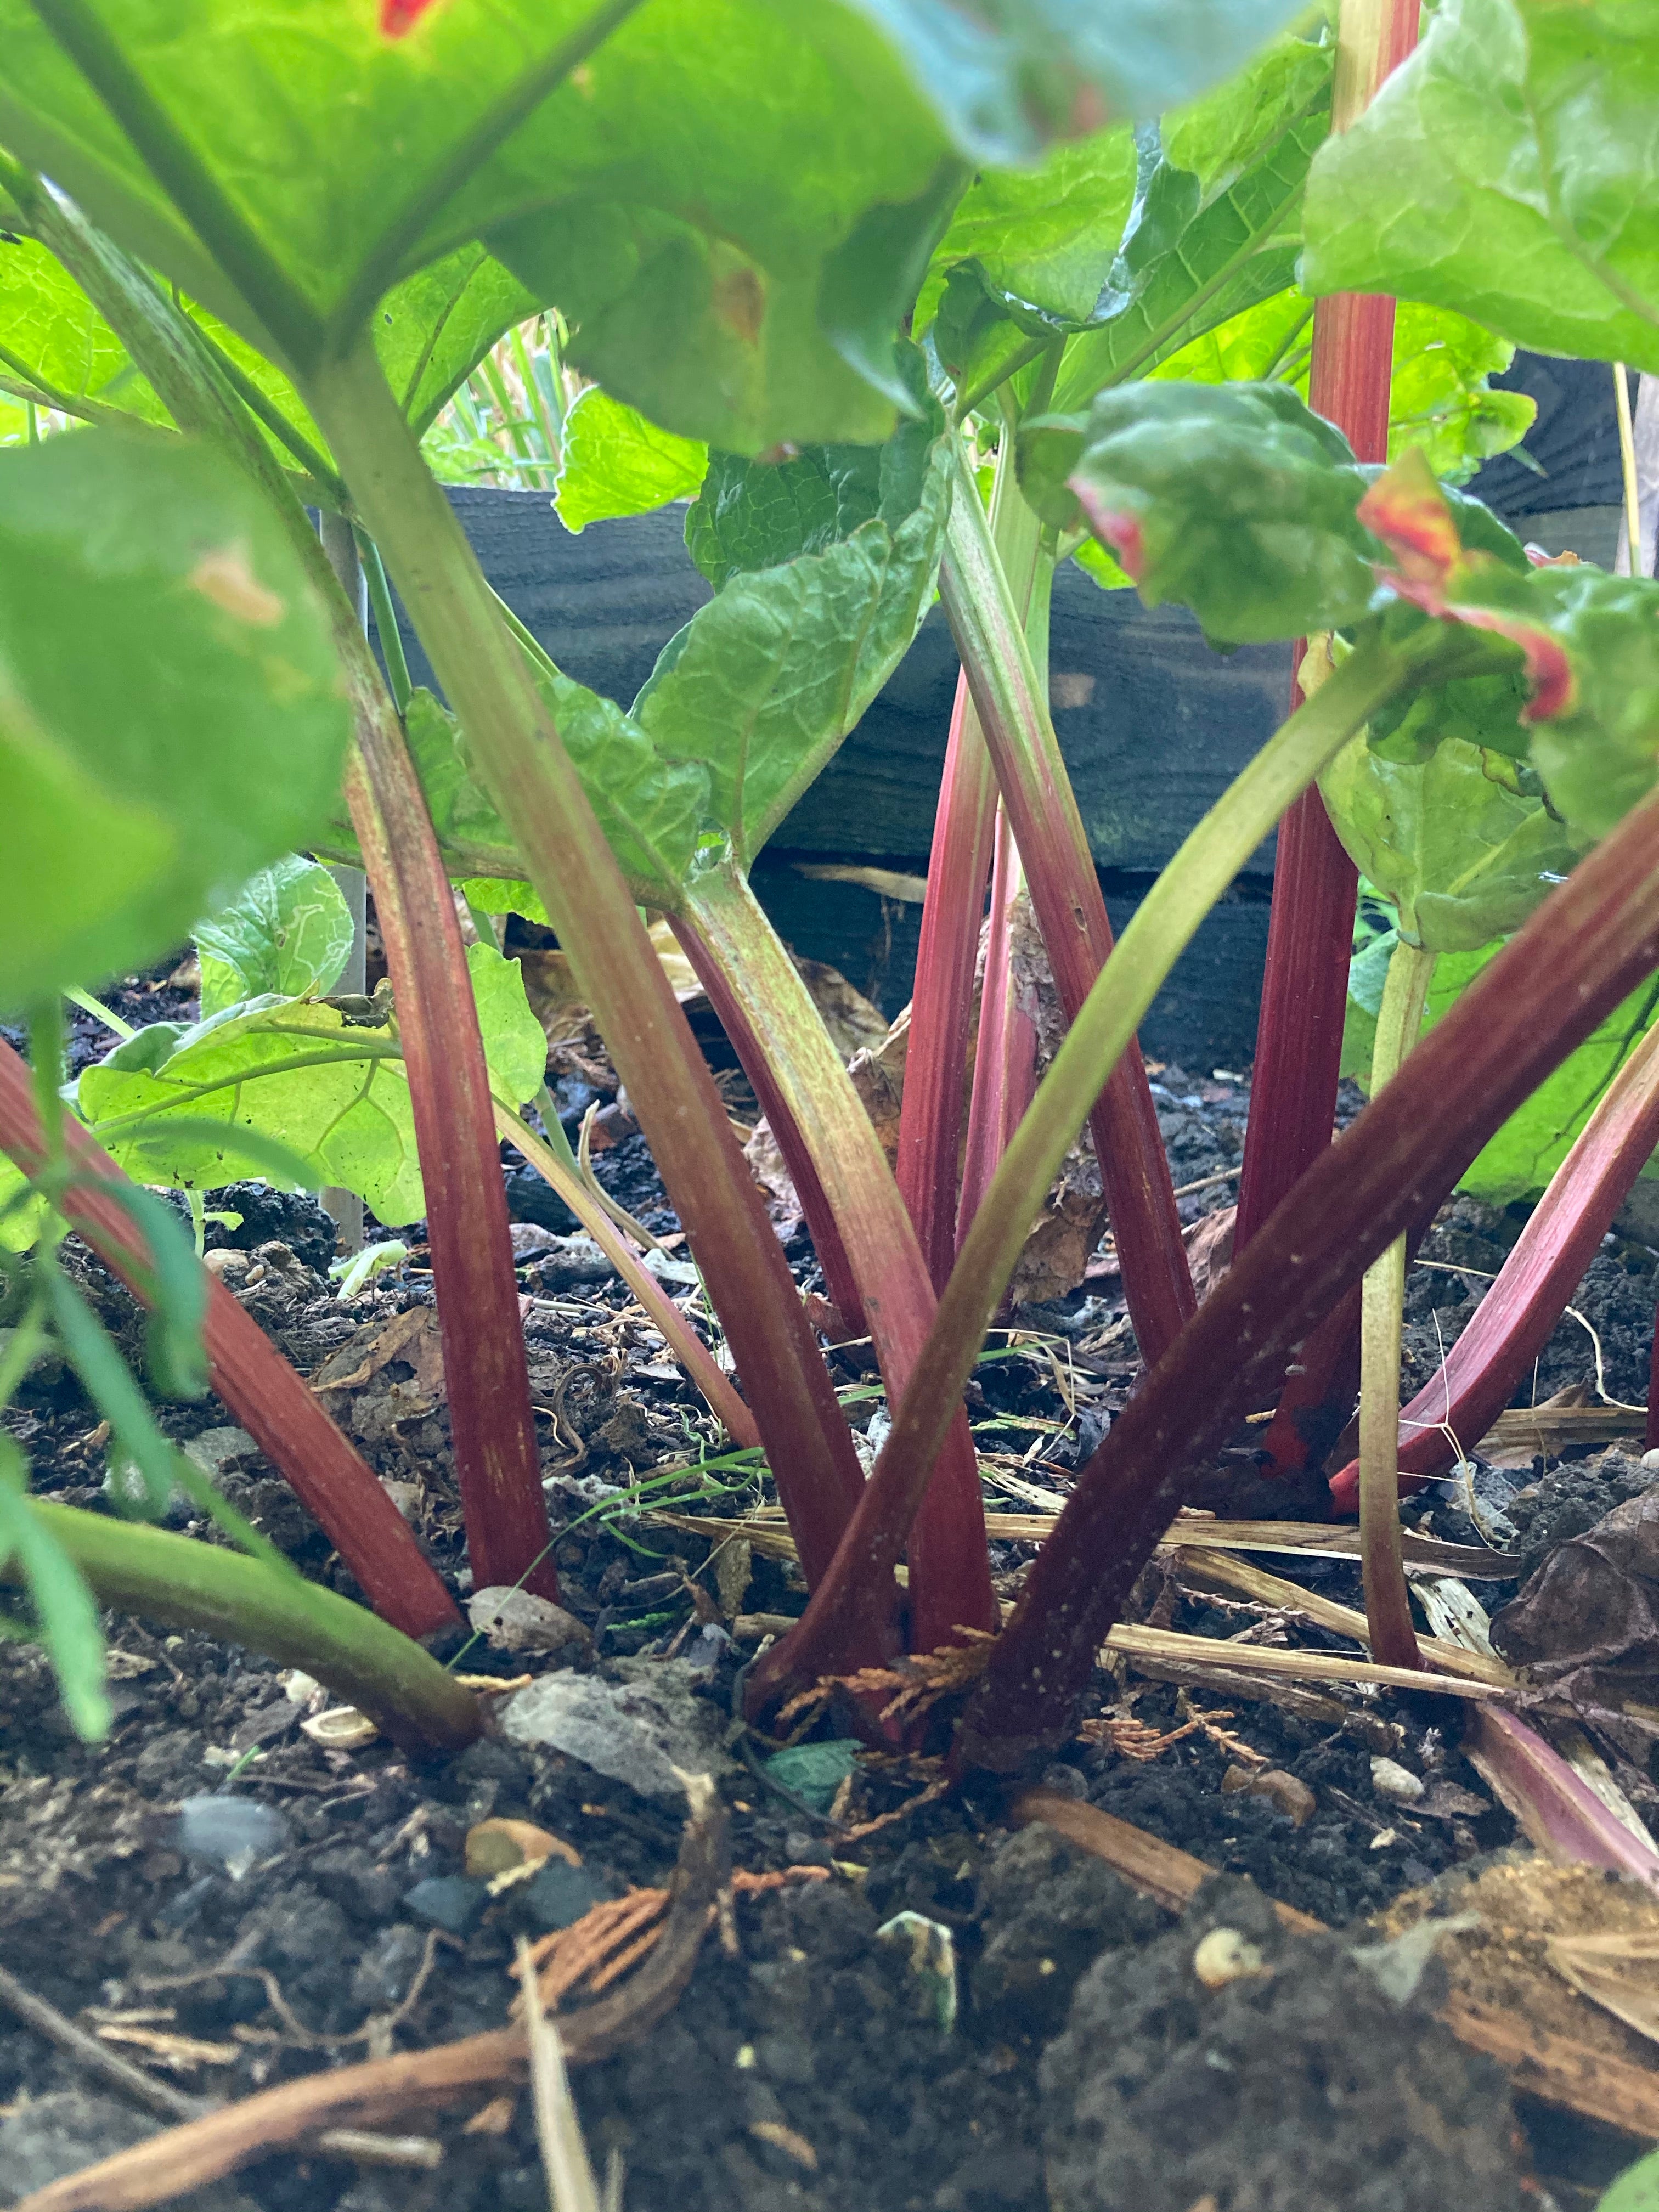 Rhubarb Plants 'Timperley Early' For Your Allotment or Garden 9 cm Dia Pots (Free UK Postage)